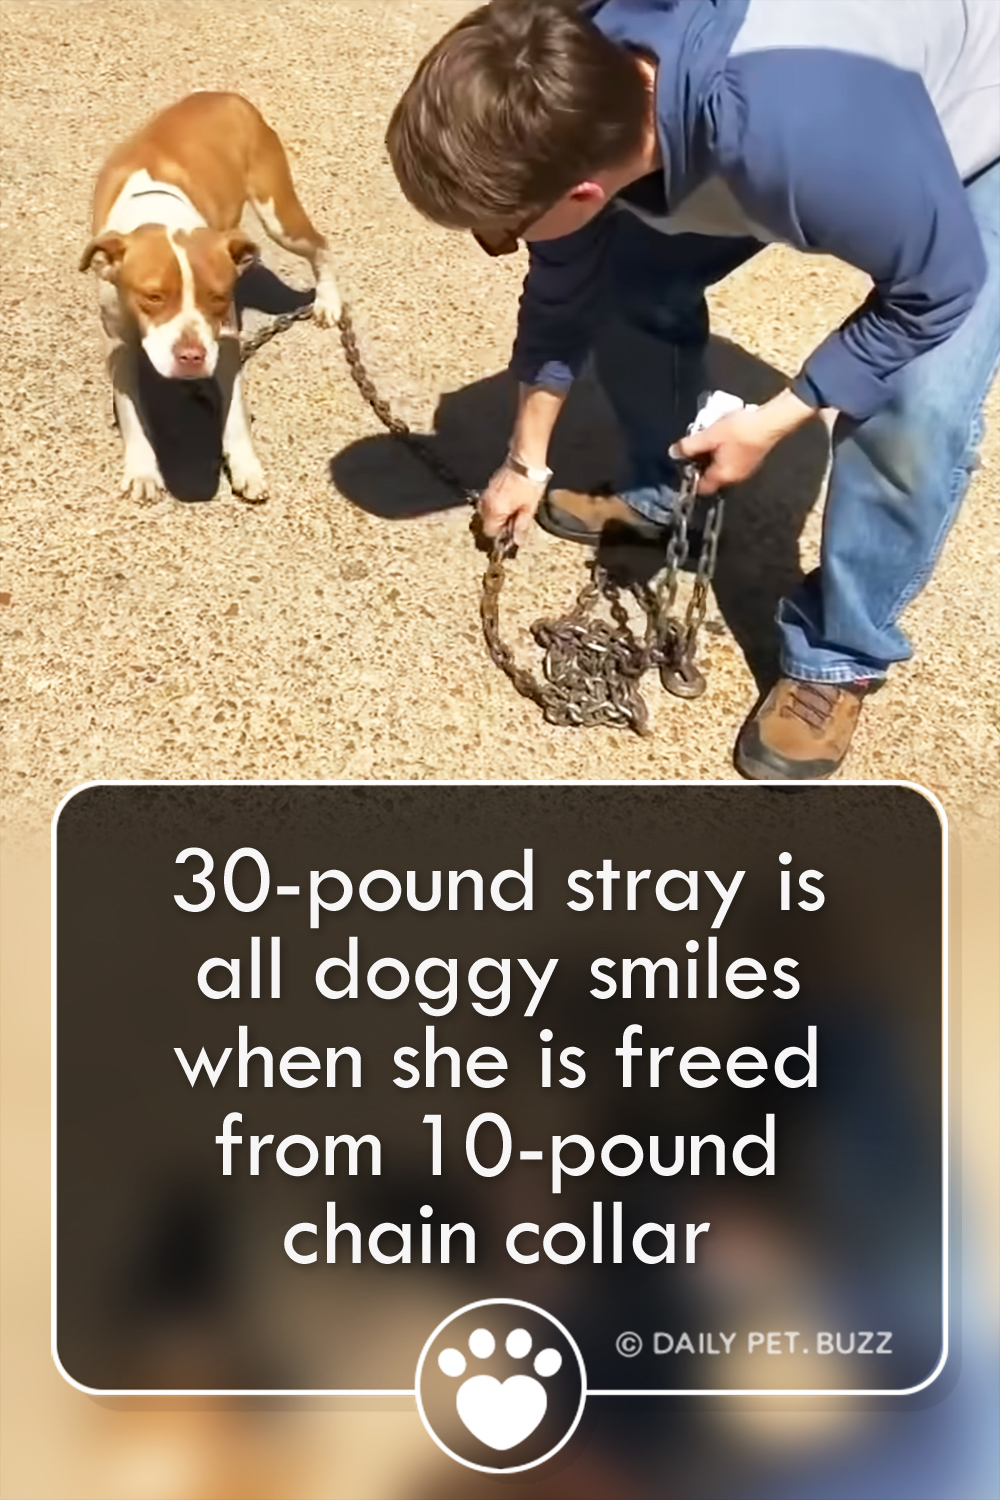 30-pound stray is all doggy smiles when she is freed from 10-pound chain collar